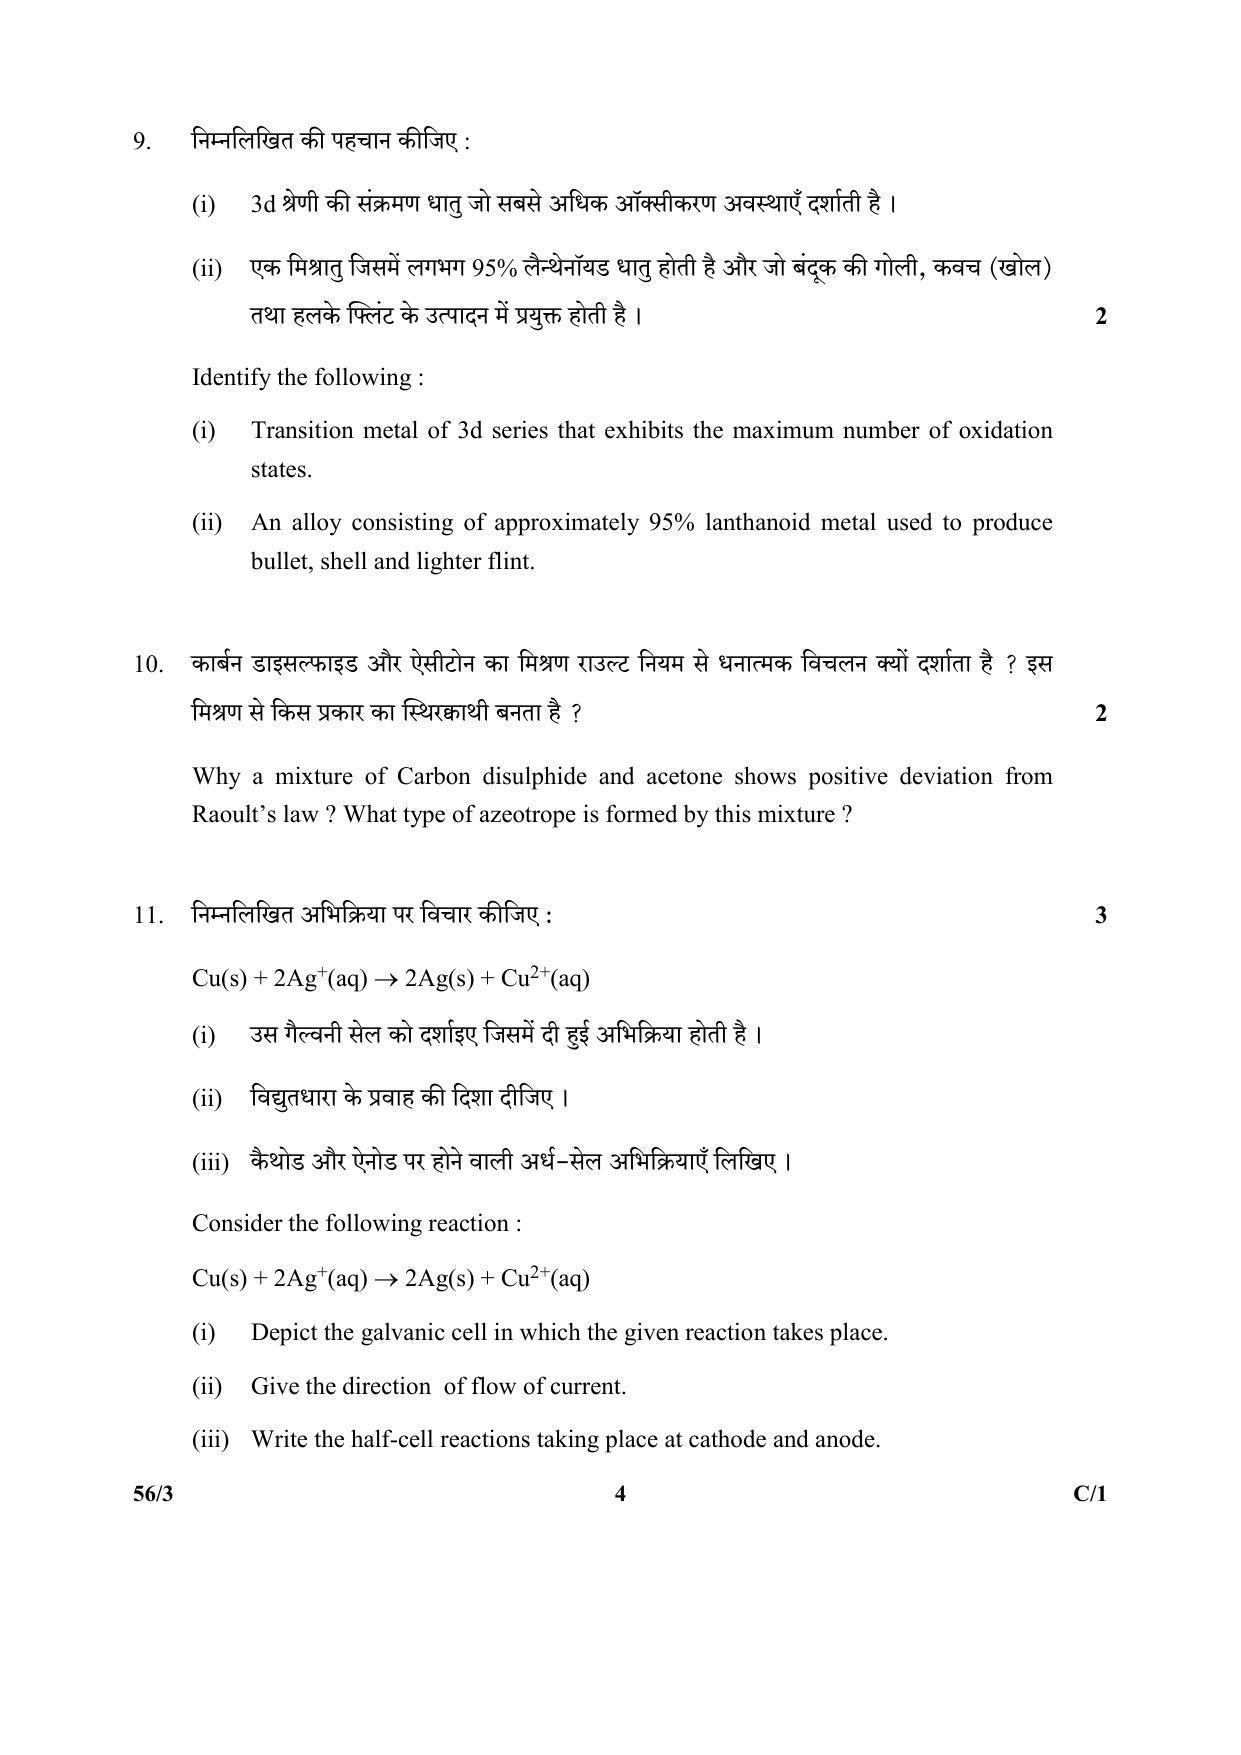 CBSE Class 12 56-3 (Chemistry) 2018 Compartment Question Paper - Page 4